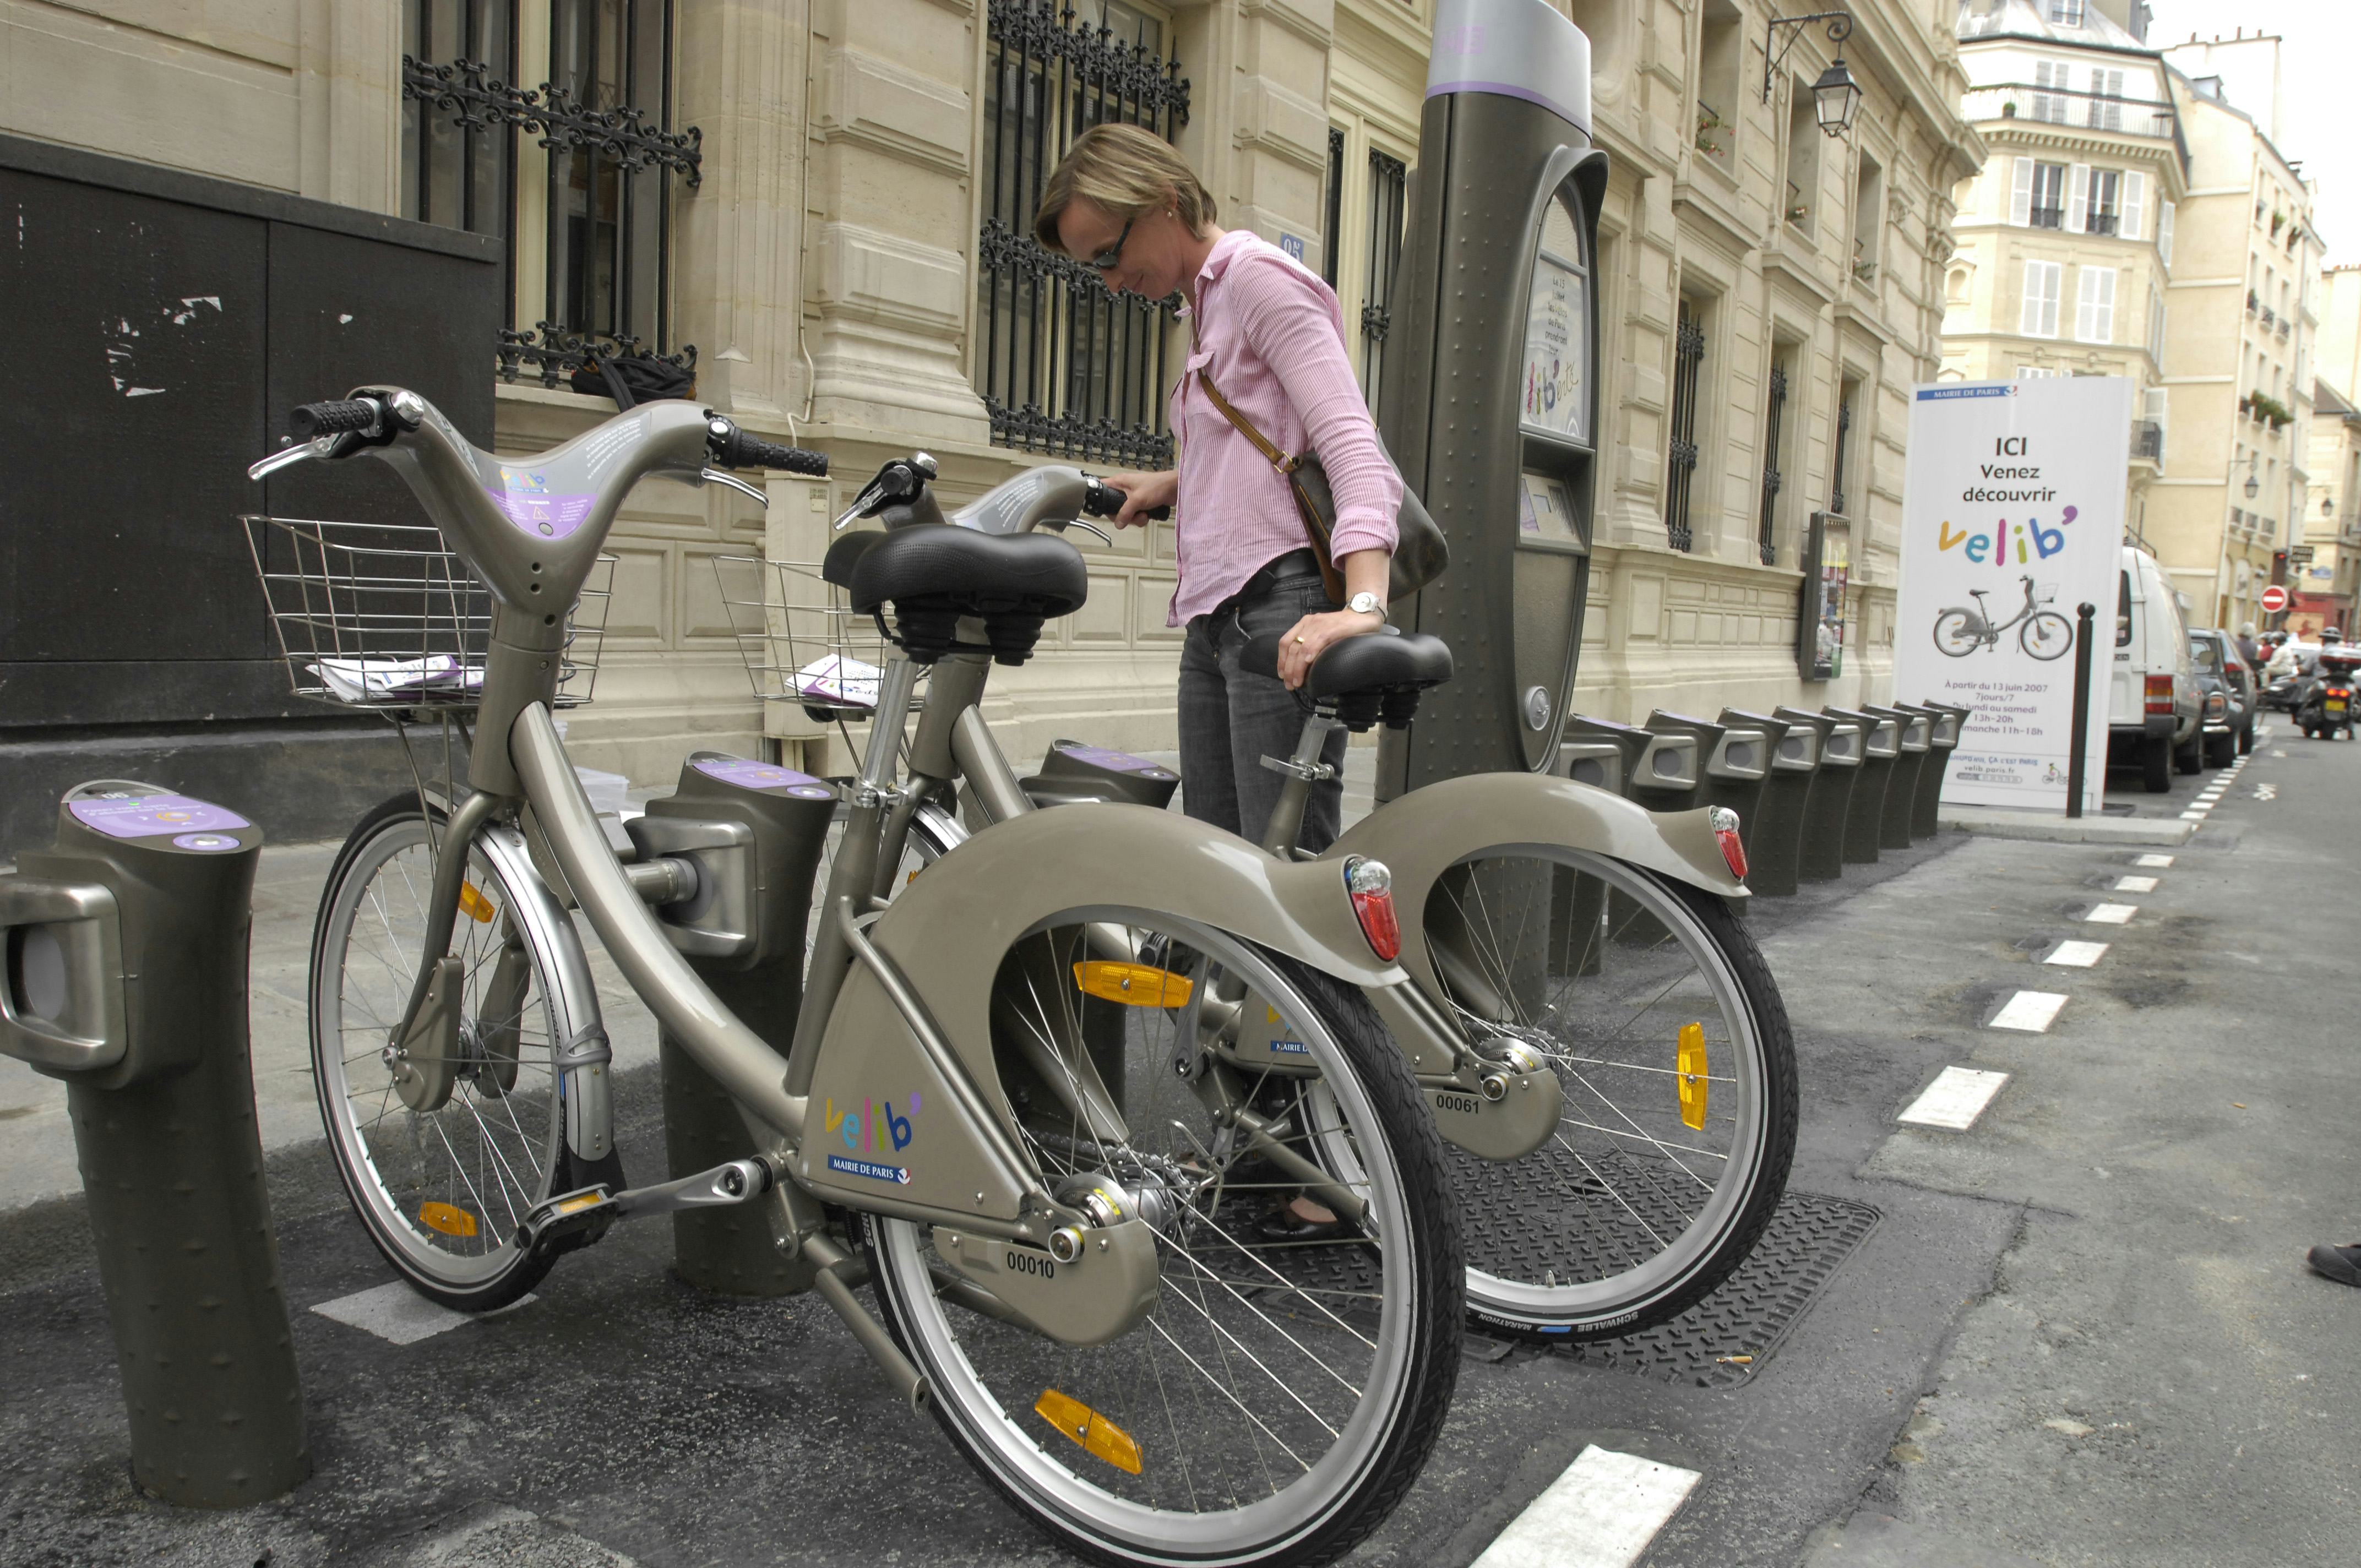 PEBSS to become reference point for municipalities looking for guidance on bike share-related topics. – Photo Marie Paris 